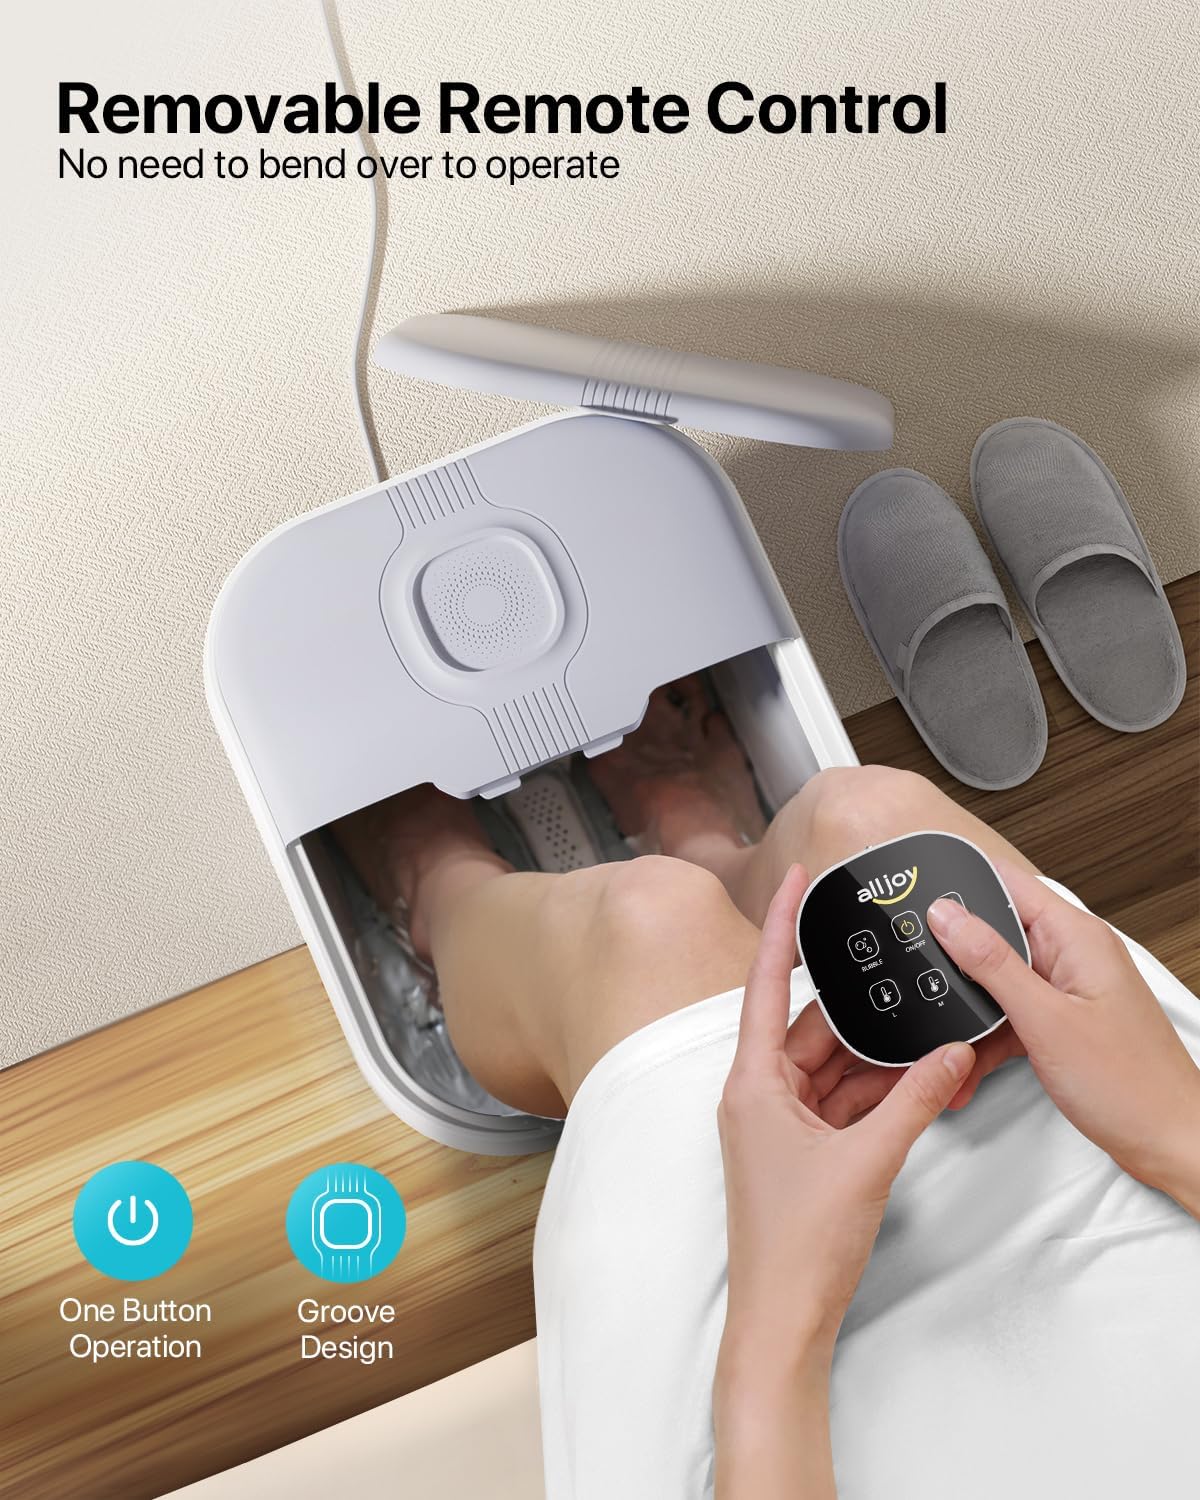 ALLJOY Foldable Foot Spa Massager with Heat